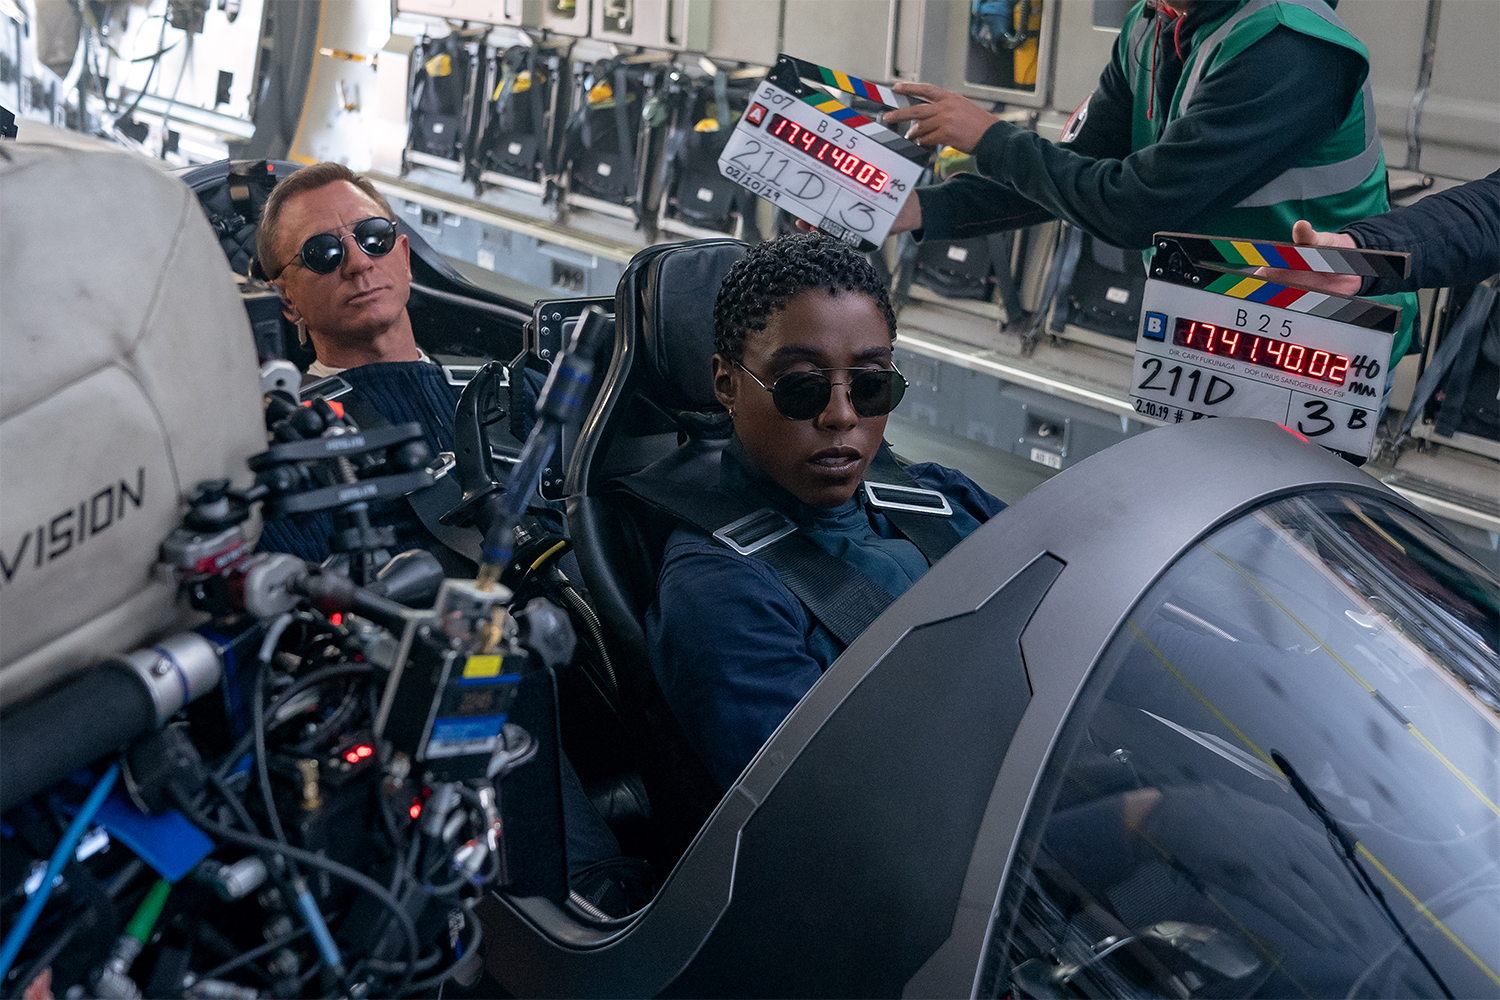 Daniel Craig (who plays James Bond) and co-star Lashana Lynch (who plays Nomi) with cameras pointed at them during the filming of a scene in "No Time to Die"